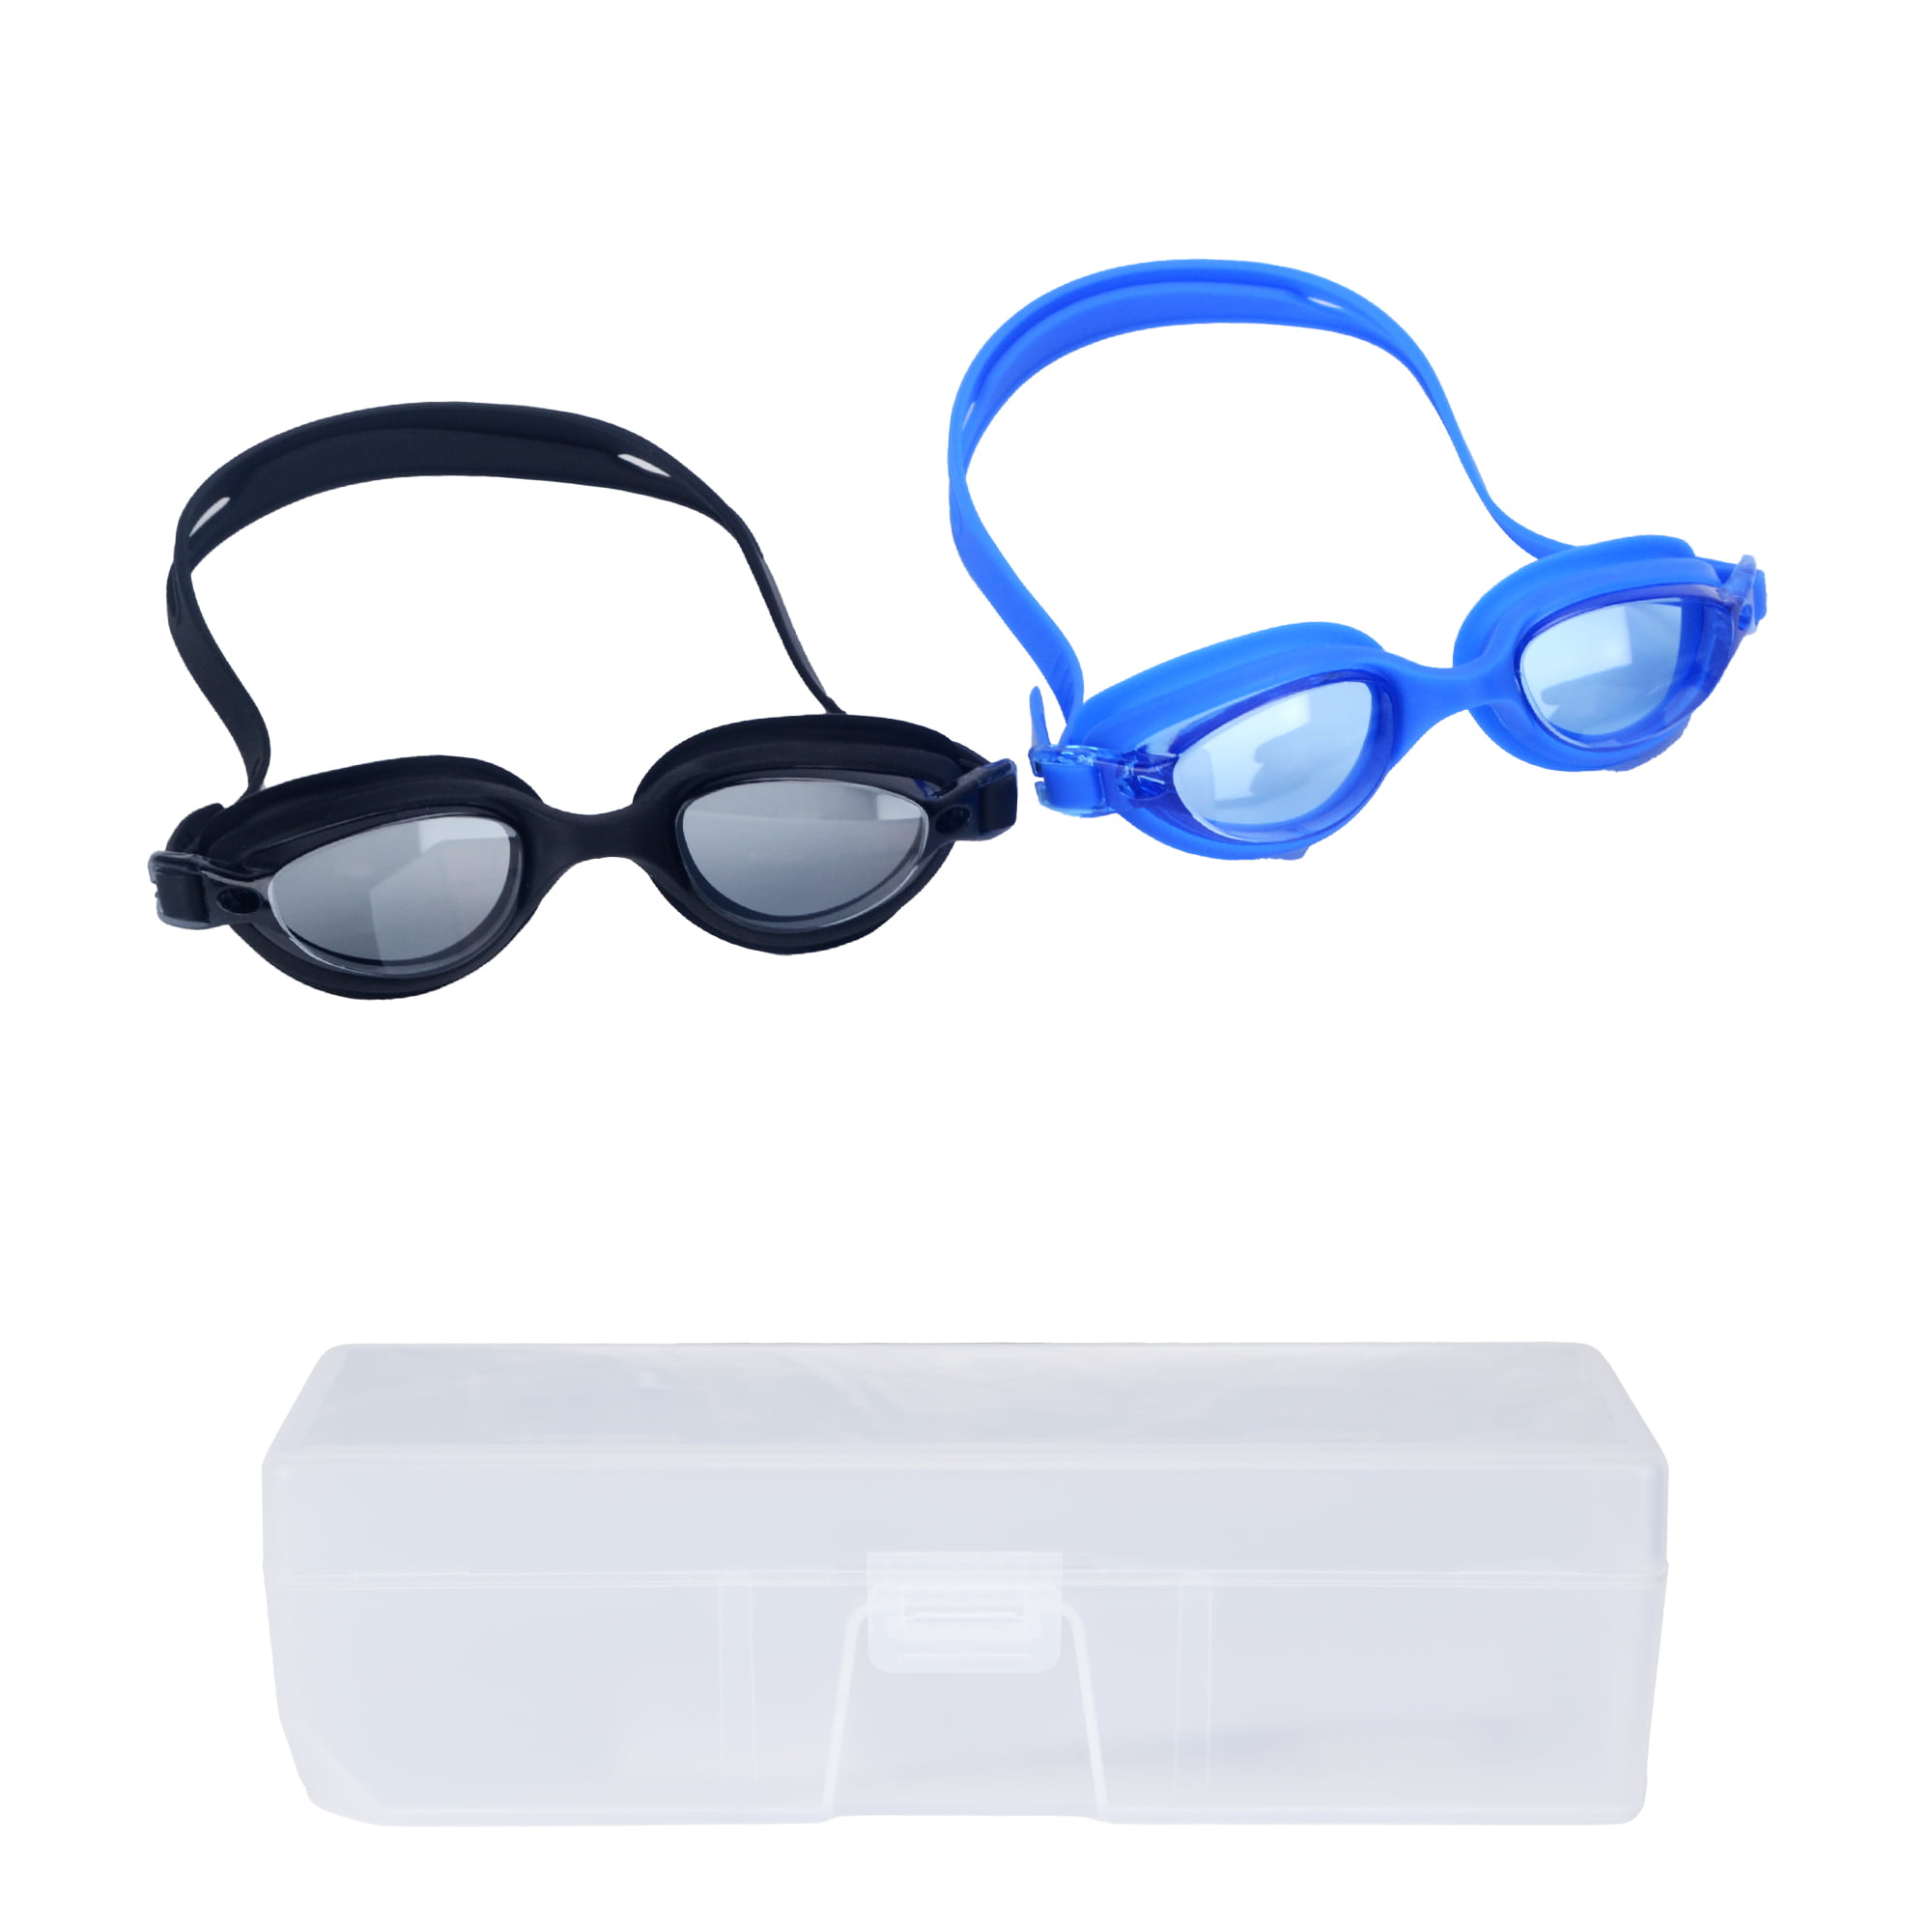 Swimming Goggles,Polarized Swim Goggles,Anti Fog UV Protection No Leakage Clear Vision Easy to Adjust,with Soft Nose Bridge for Men Women Adults Teenagers 